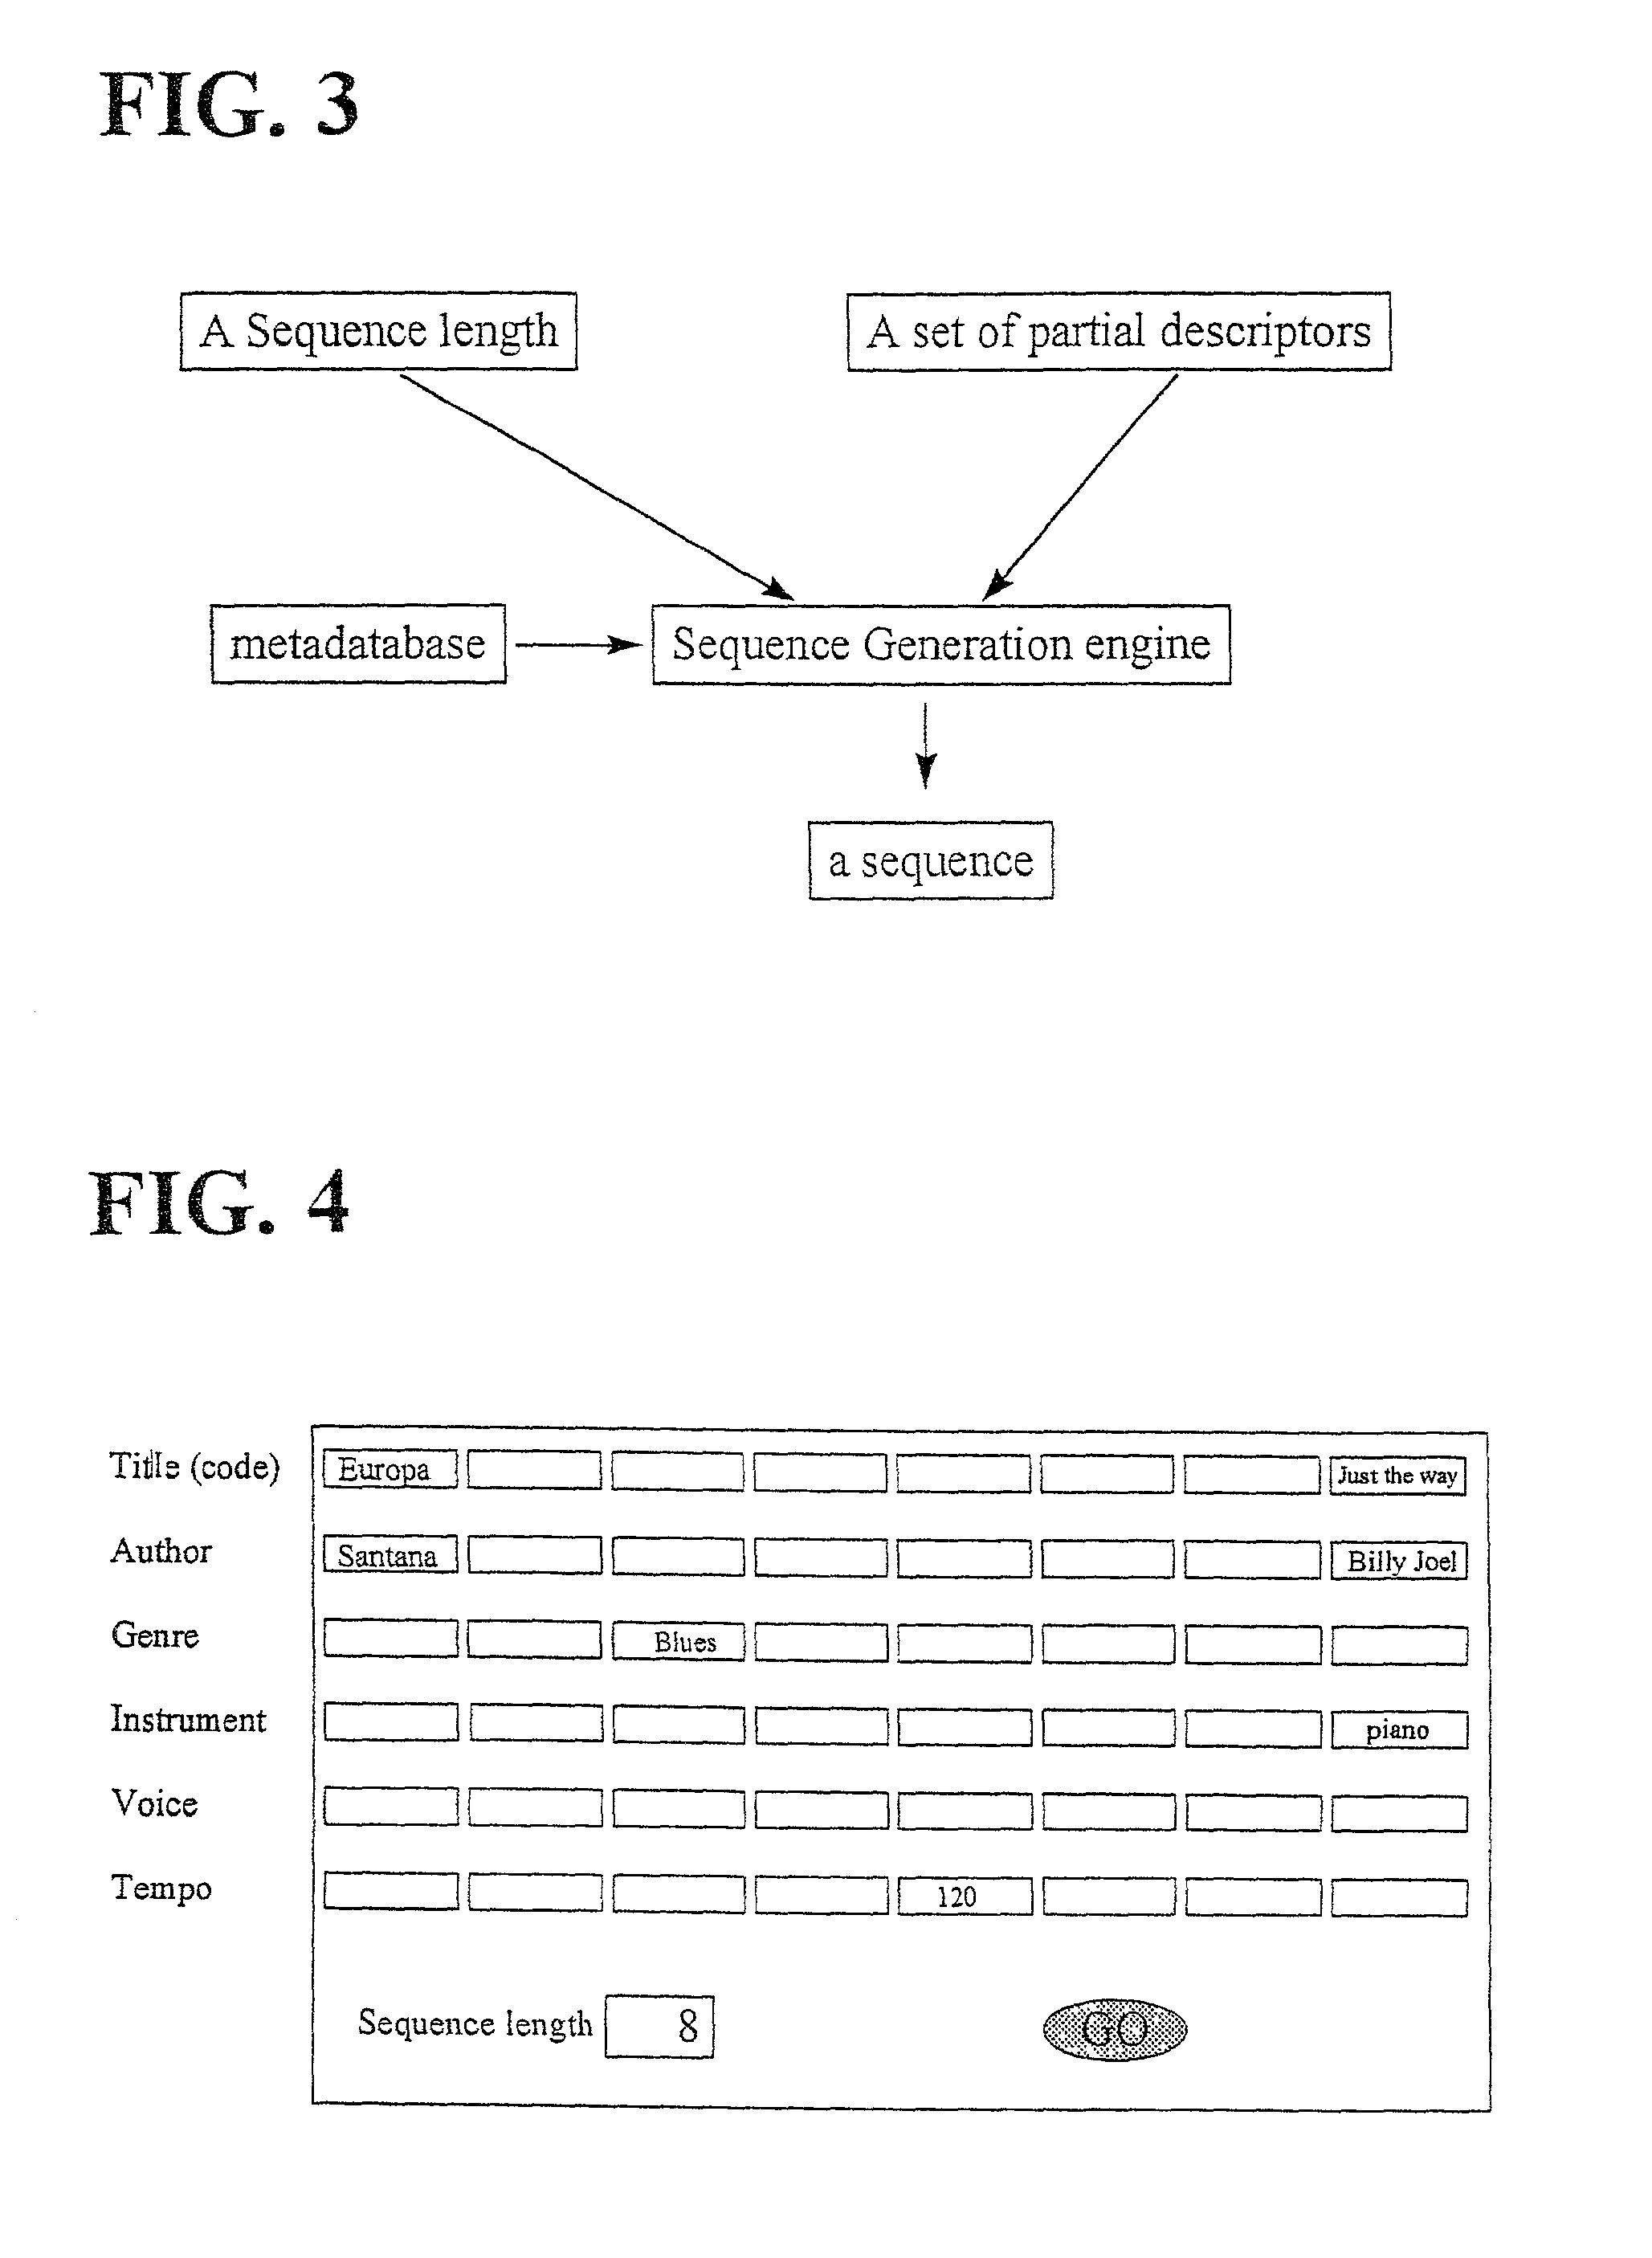 Method and system for generating sequencing information representing a sequence of items selected in a database